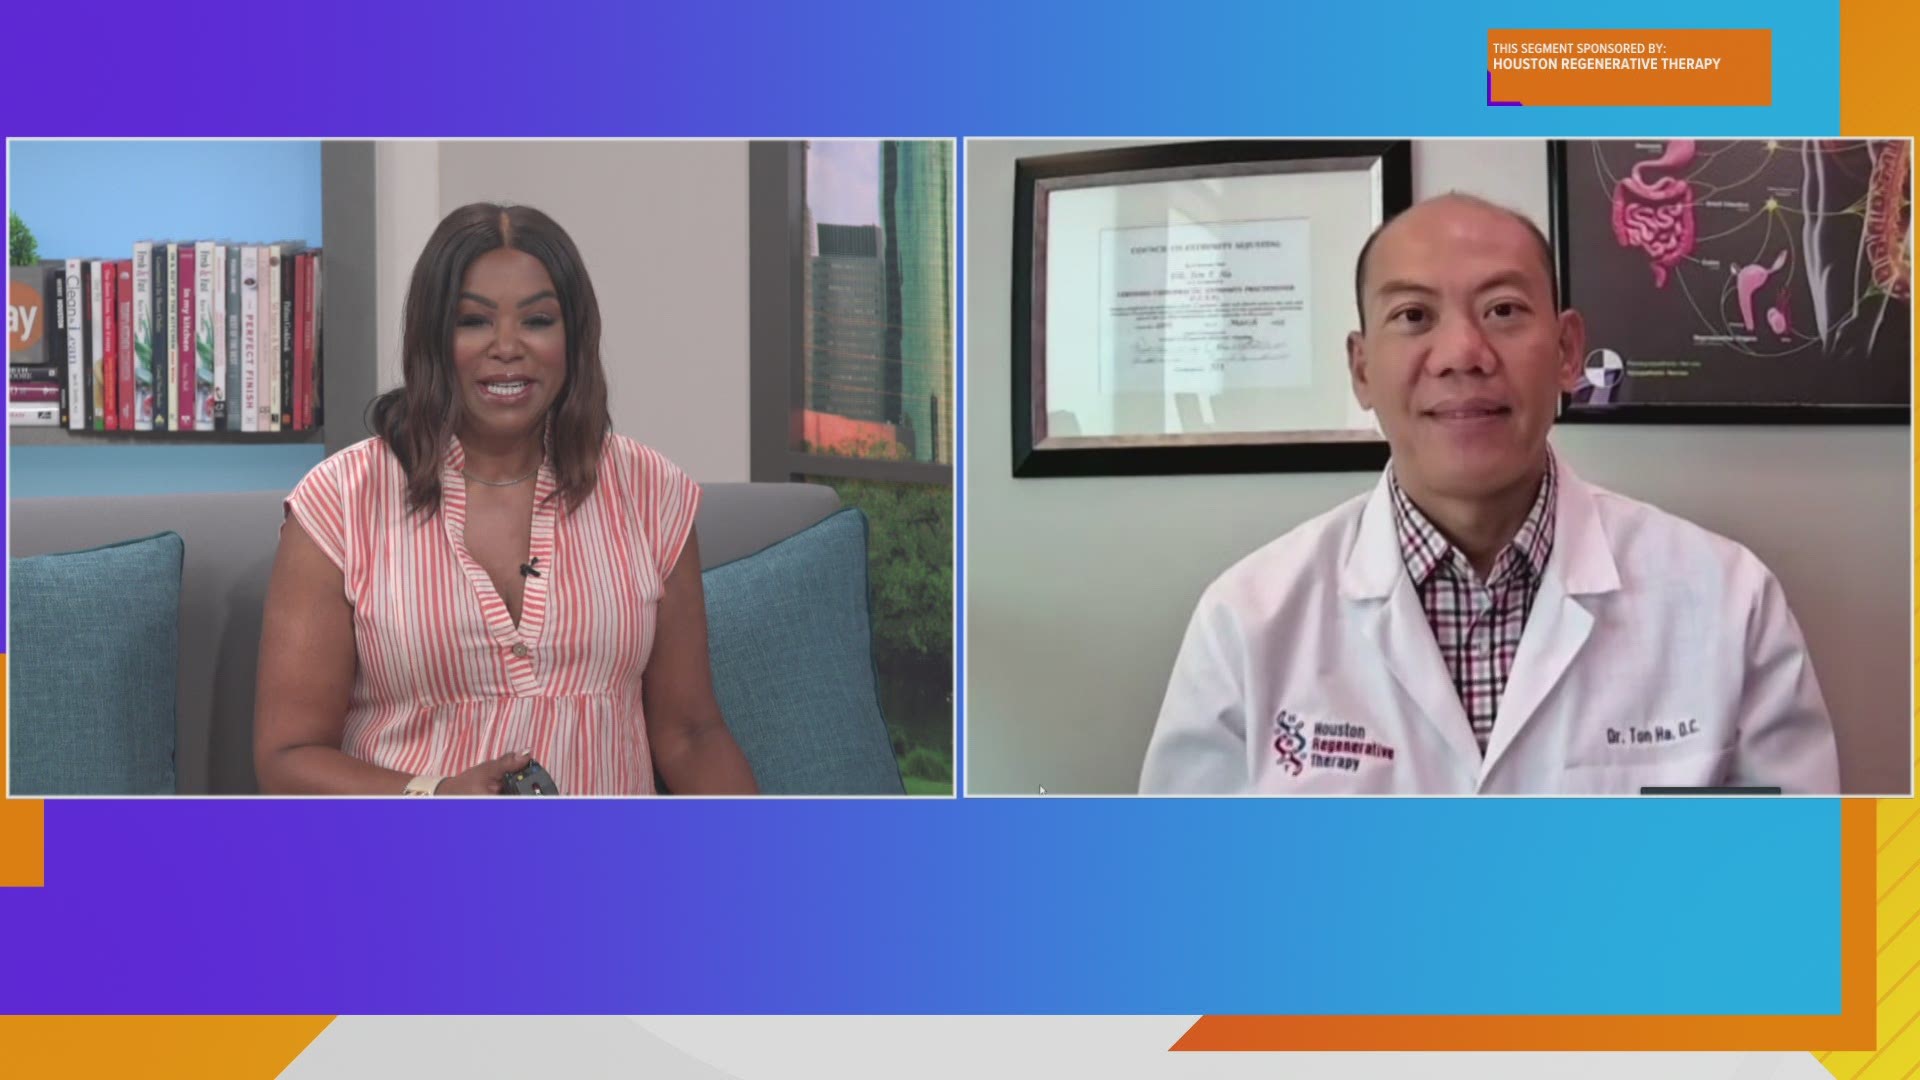 Dr. Ton Ha with Houston Regenerative Therapy discusses cutting-edge technology that reverses neuropathy without pills, drugs, or injections.